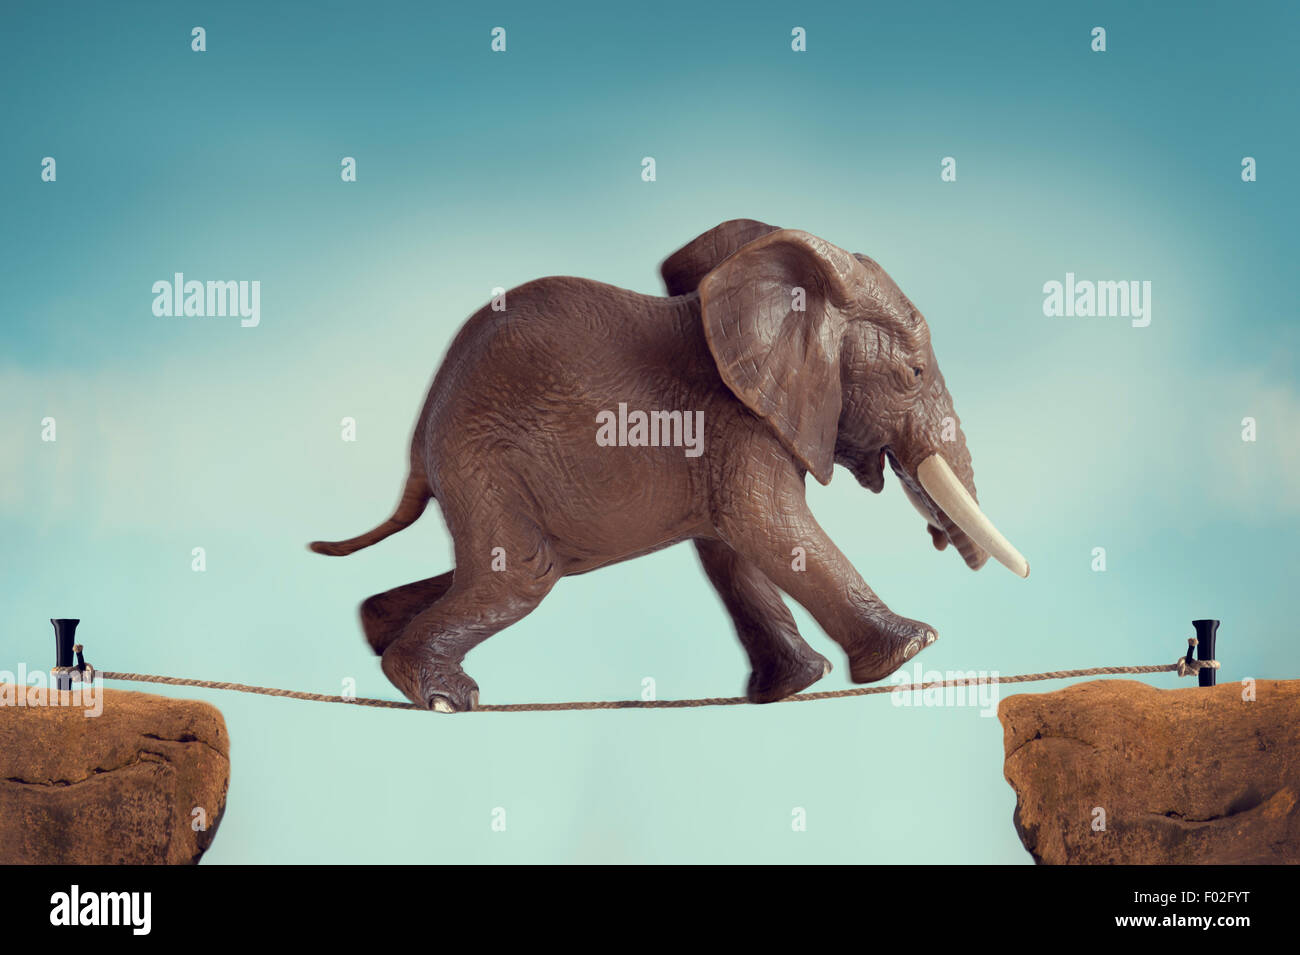 elephant running across a tightrope relocation concept Stock Photo